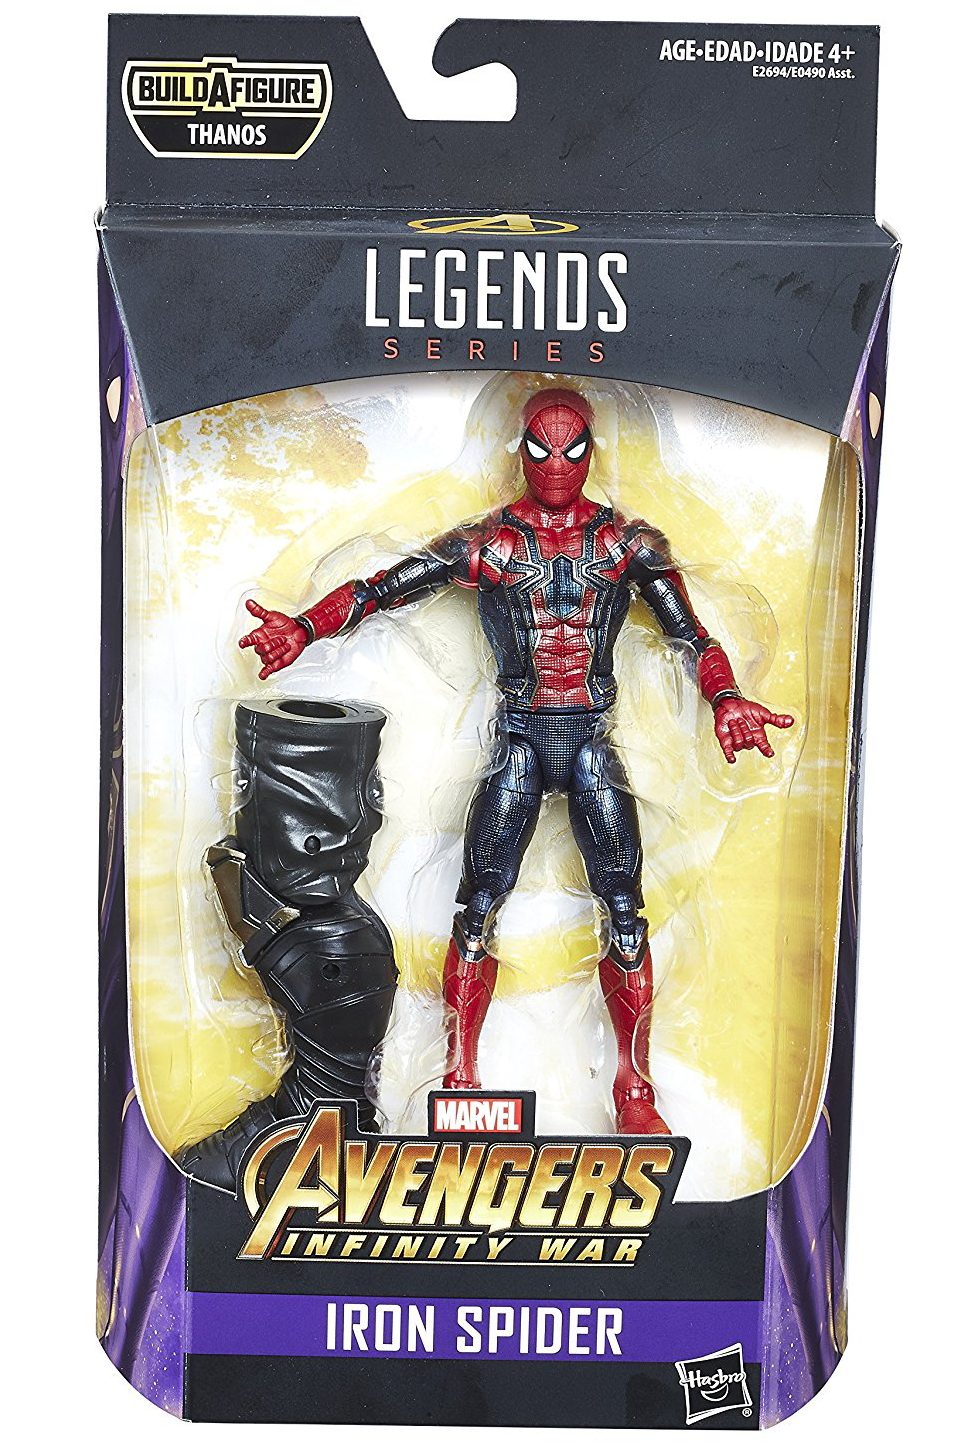 Marvel Legends 6" Scarlet Witch Avengers Infinity War MCU New Loose Toys R Us